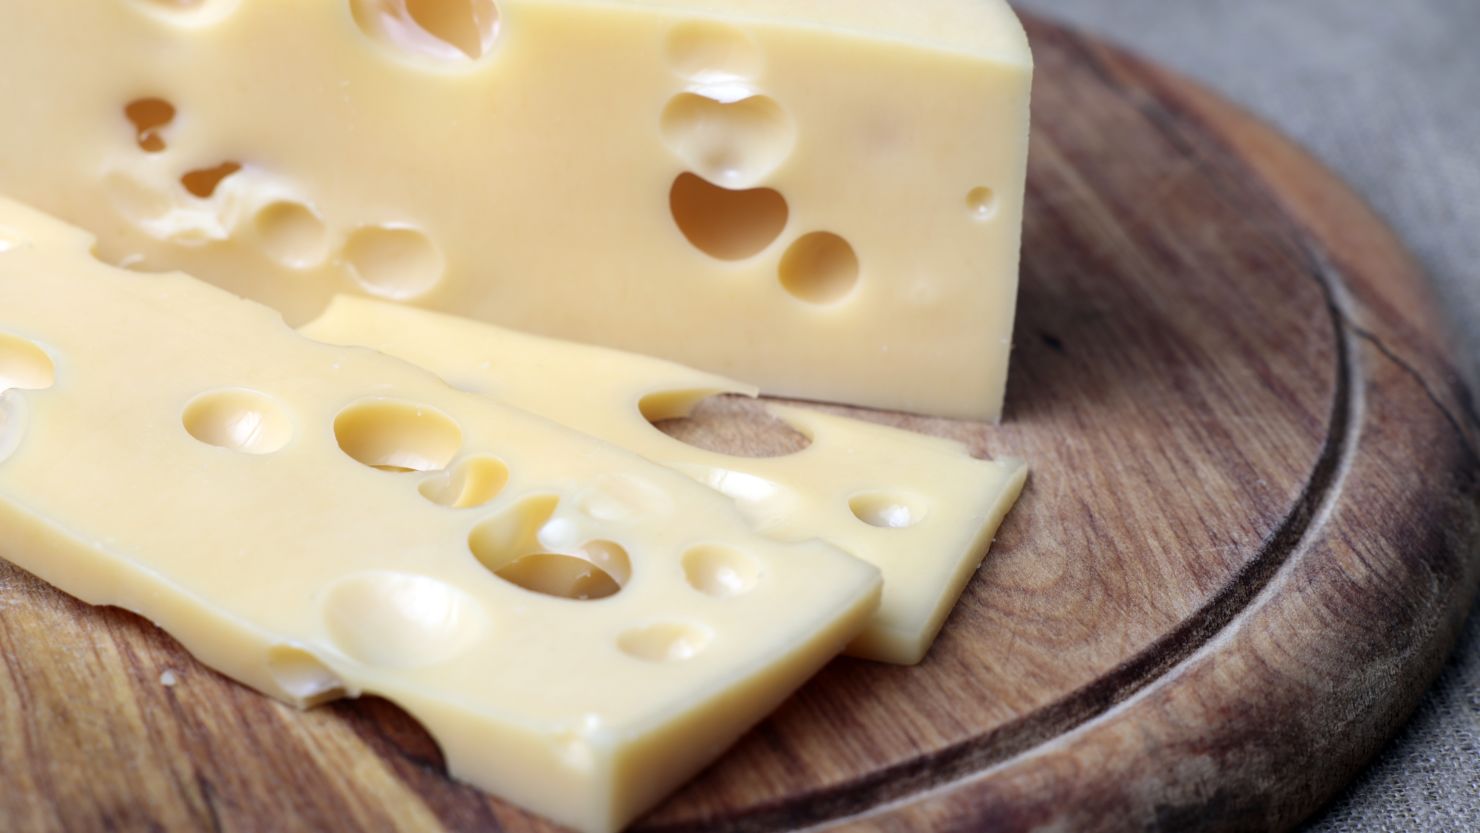 Modern science has established that old-style processing led to the holes in Swiss cheese.